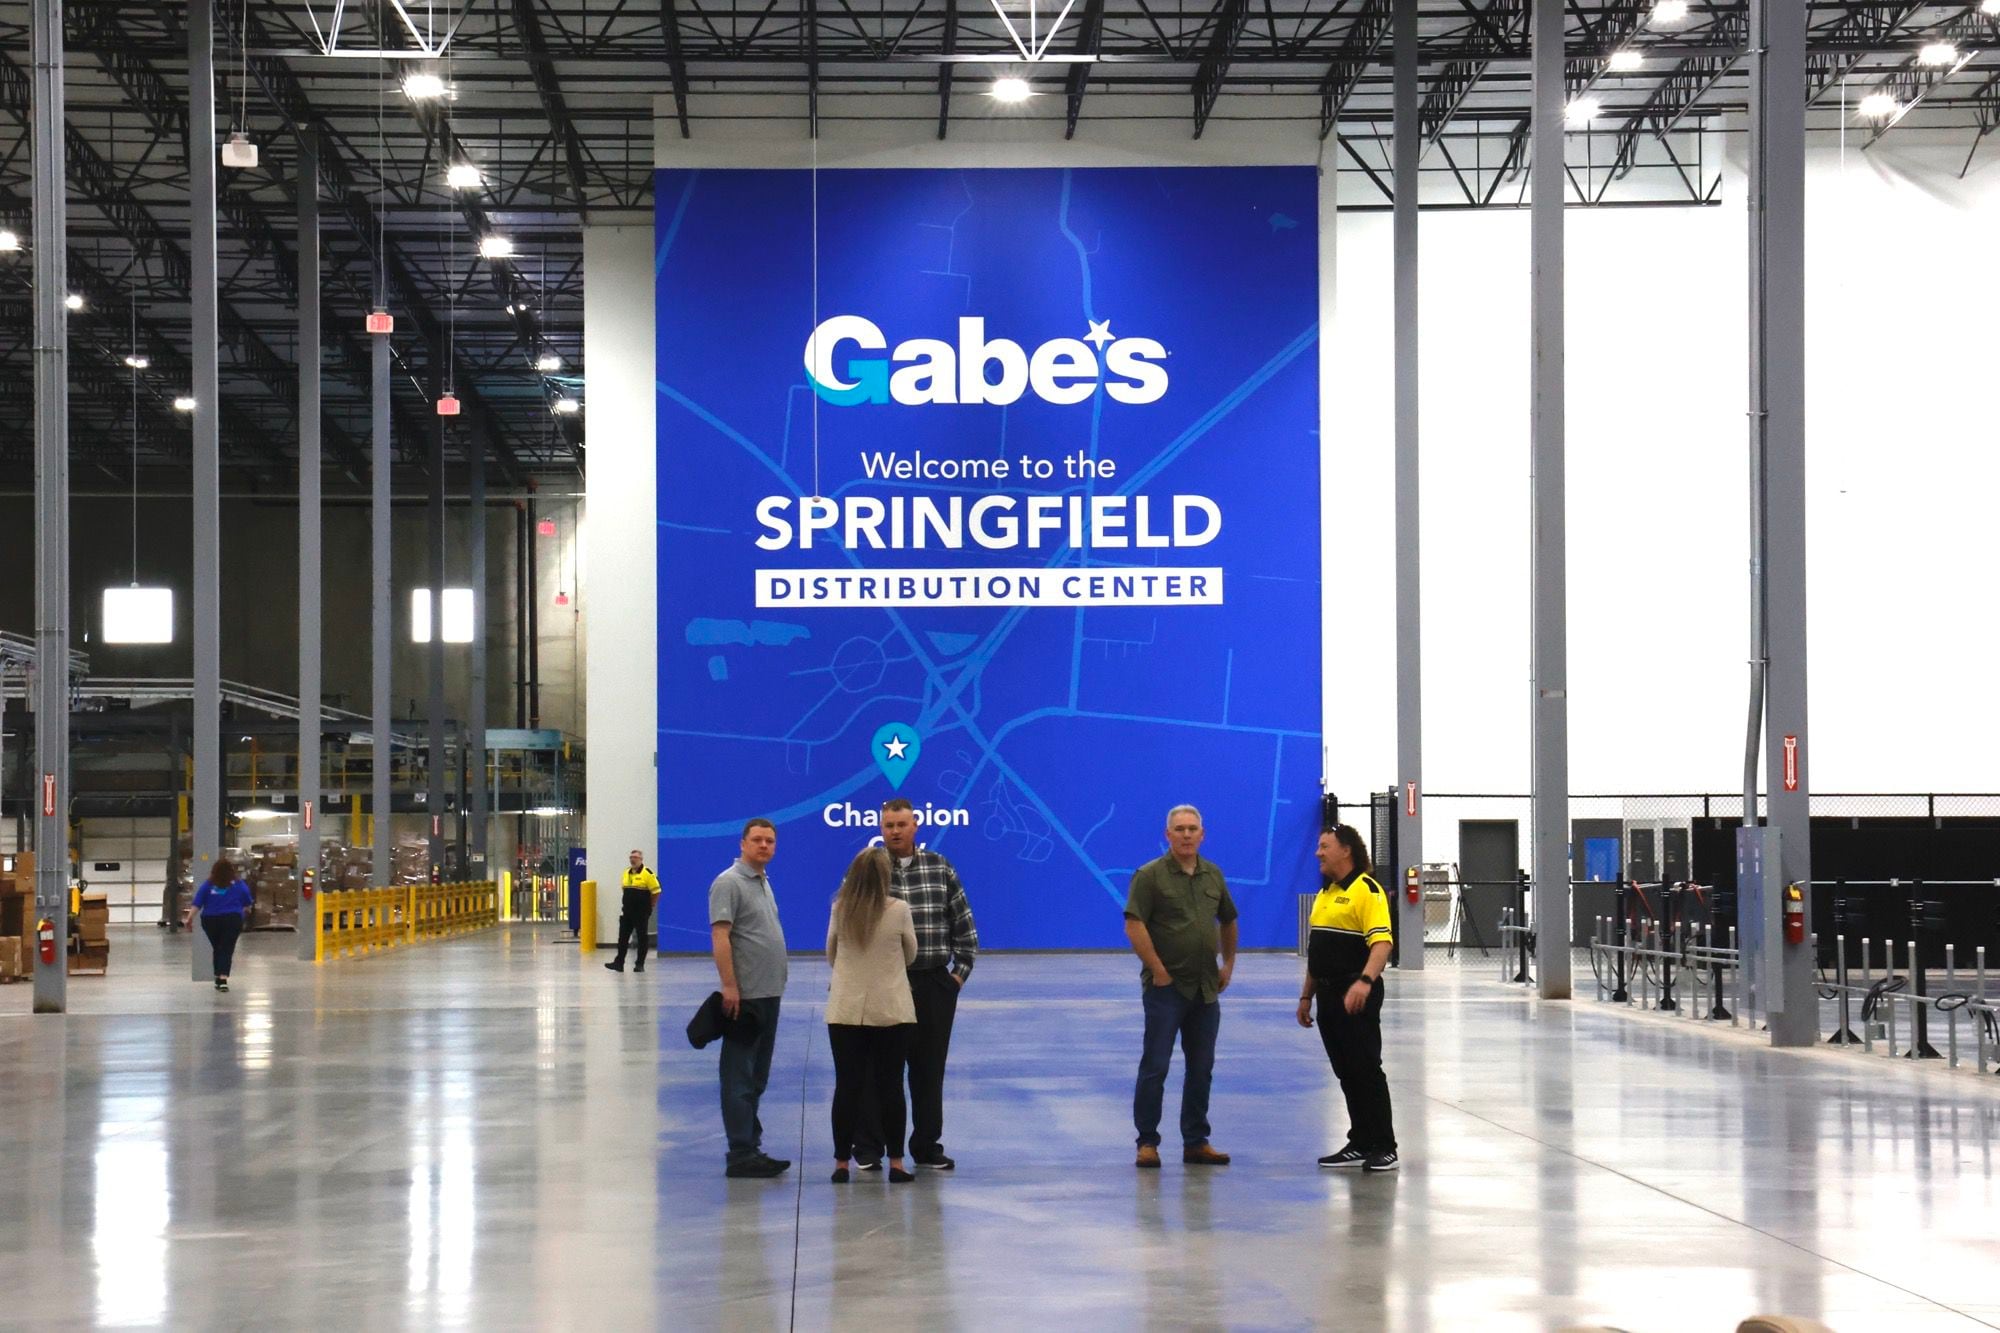 Gabe's distribution center in Springfield officially opens